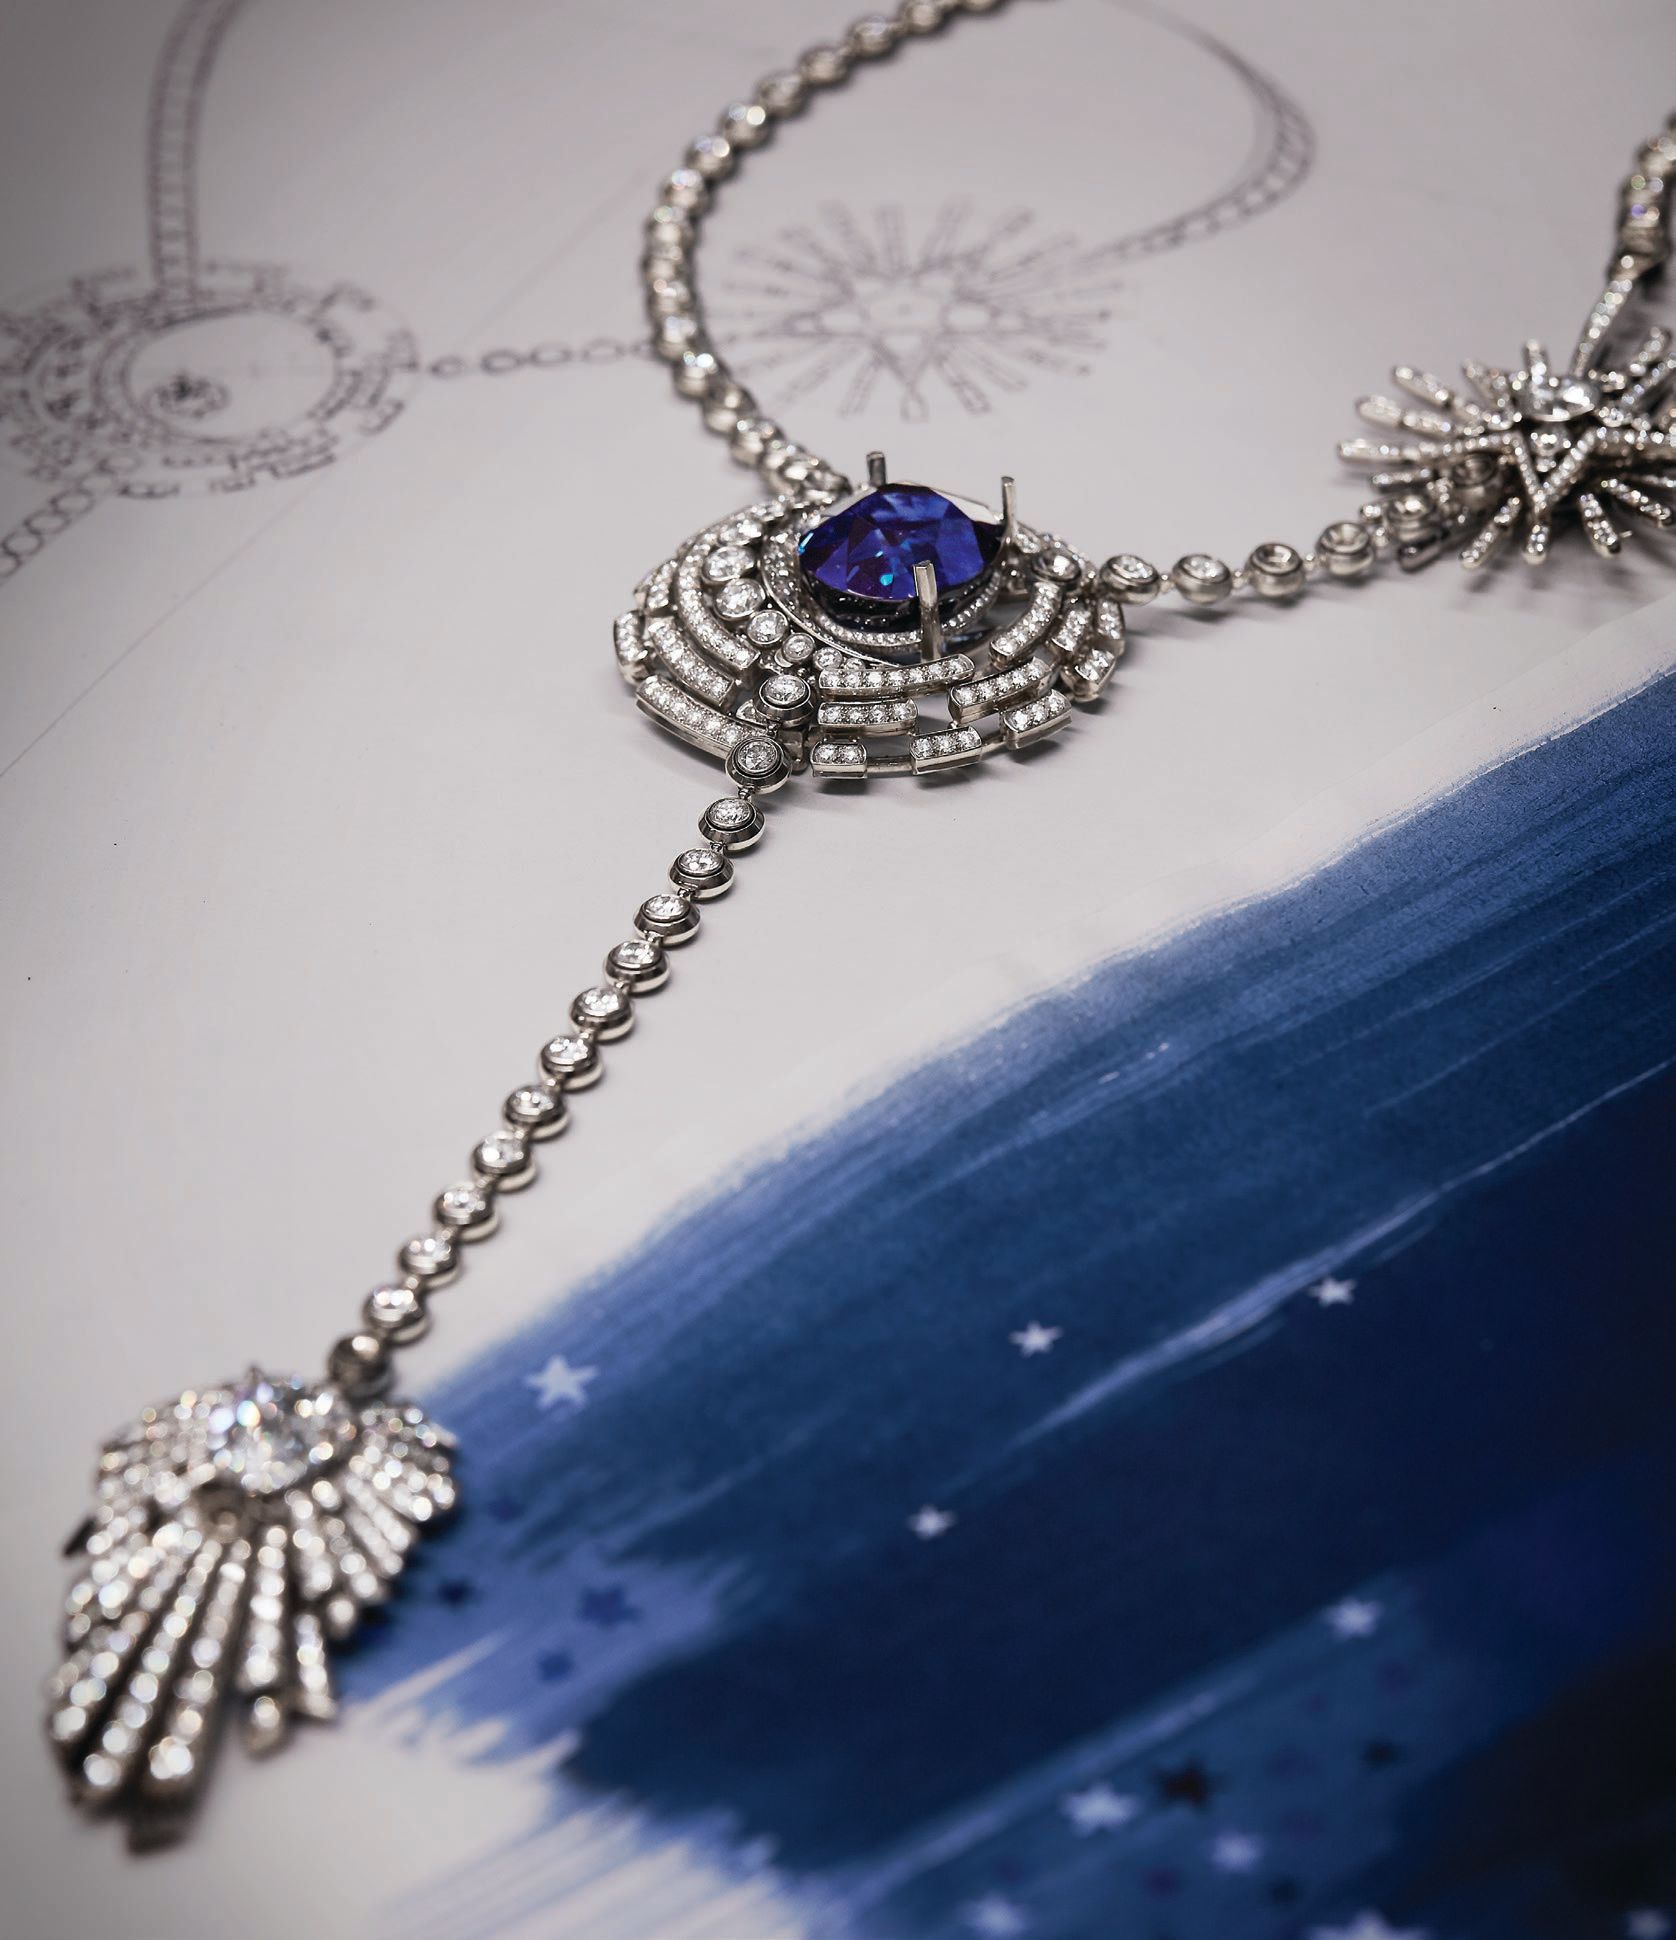 Chanel High Jewelry Allure Celeste necklace in 18K white gold, diamonds and sapphire, chanel.com PHOTO COURTESY OF BRAND